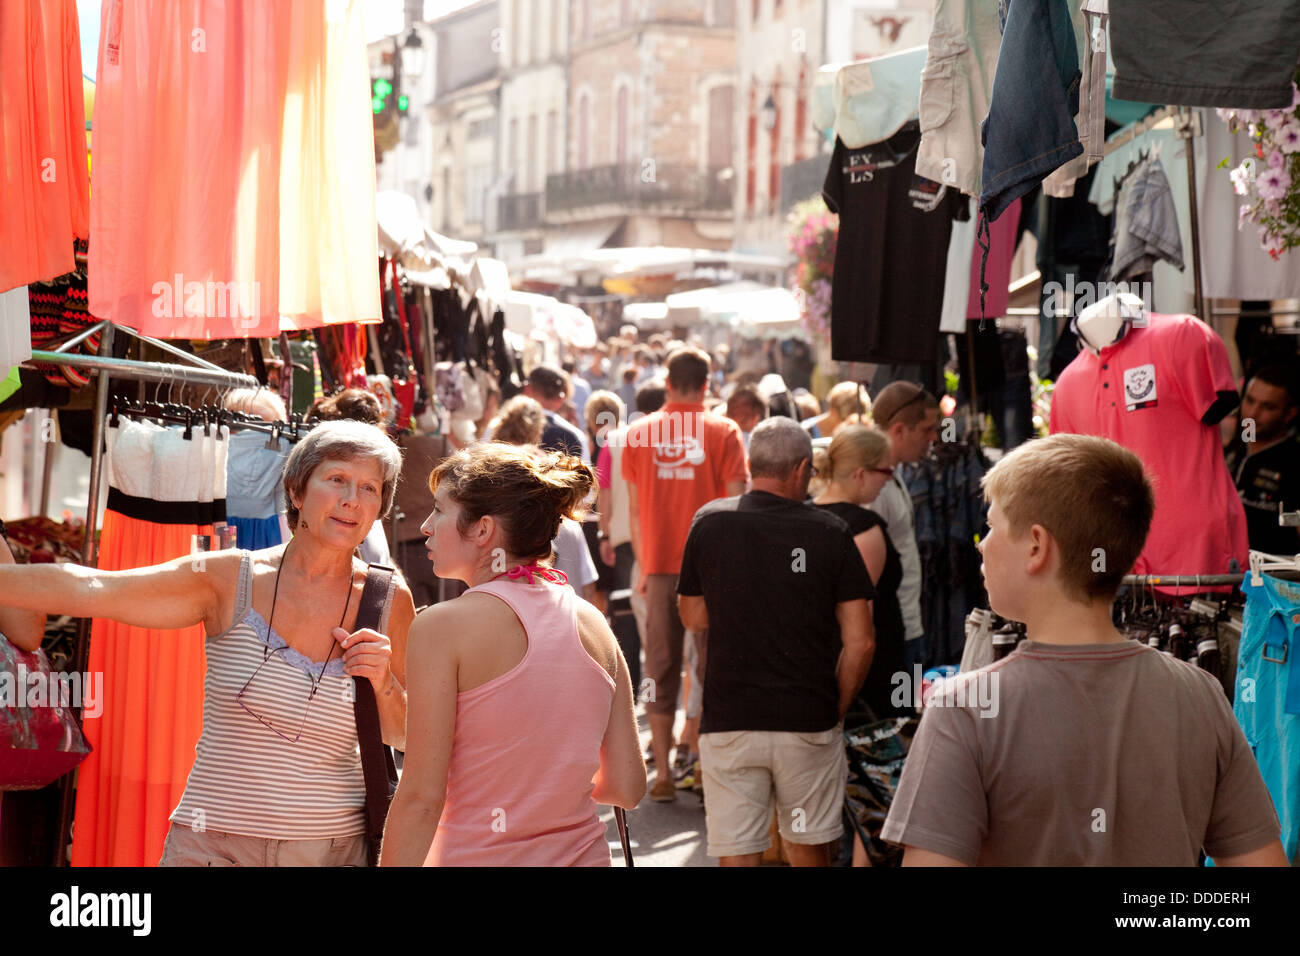 French market in Ste Liverade sur Lot, Lot-et-Garonne, people shopping for clothes, France Europe Stock Photo